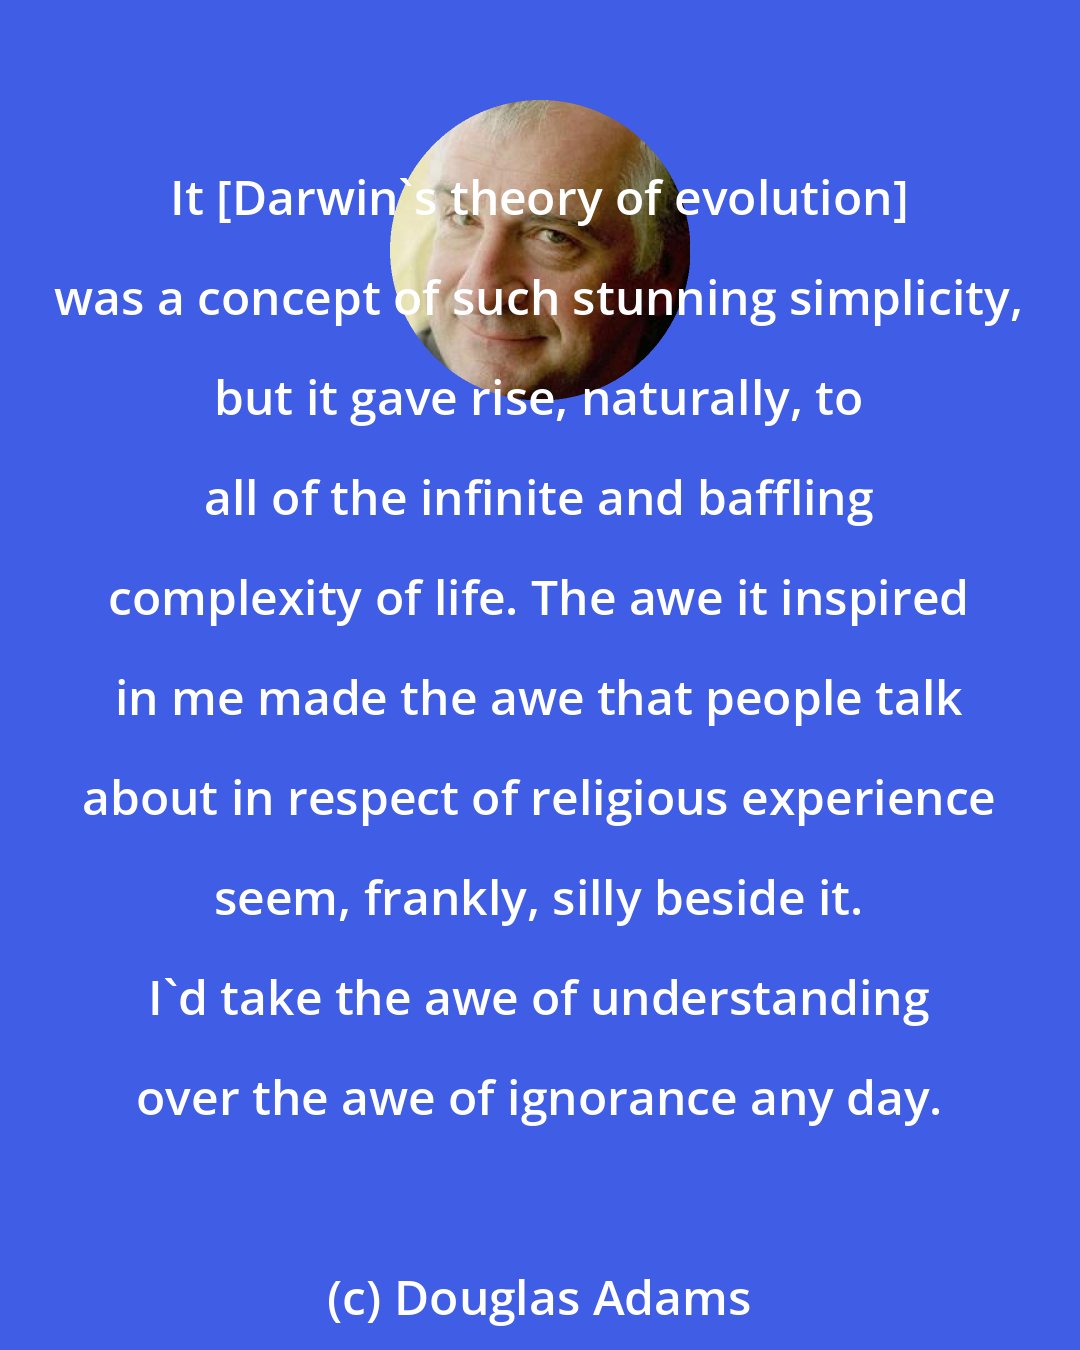 Douglas Adams: It {Darwin's theory of evolution] was a concept of such stunning simplicity, but it gave rise, naturally, to all of the infinite and baffling complexity of life. The awe it inspired in me made the awe that people talk about in respect of religious experience seem, frankly, silly beside it. I'd take the awe of understanding over the awe of ignorance any day.